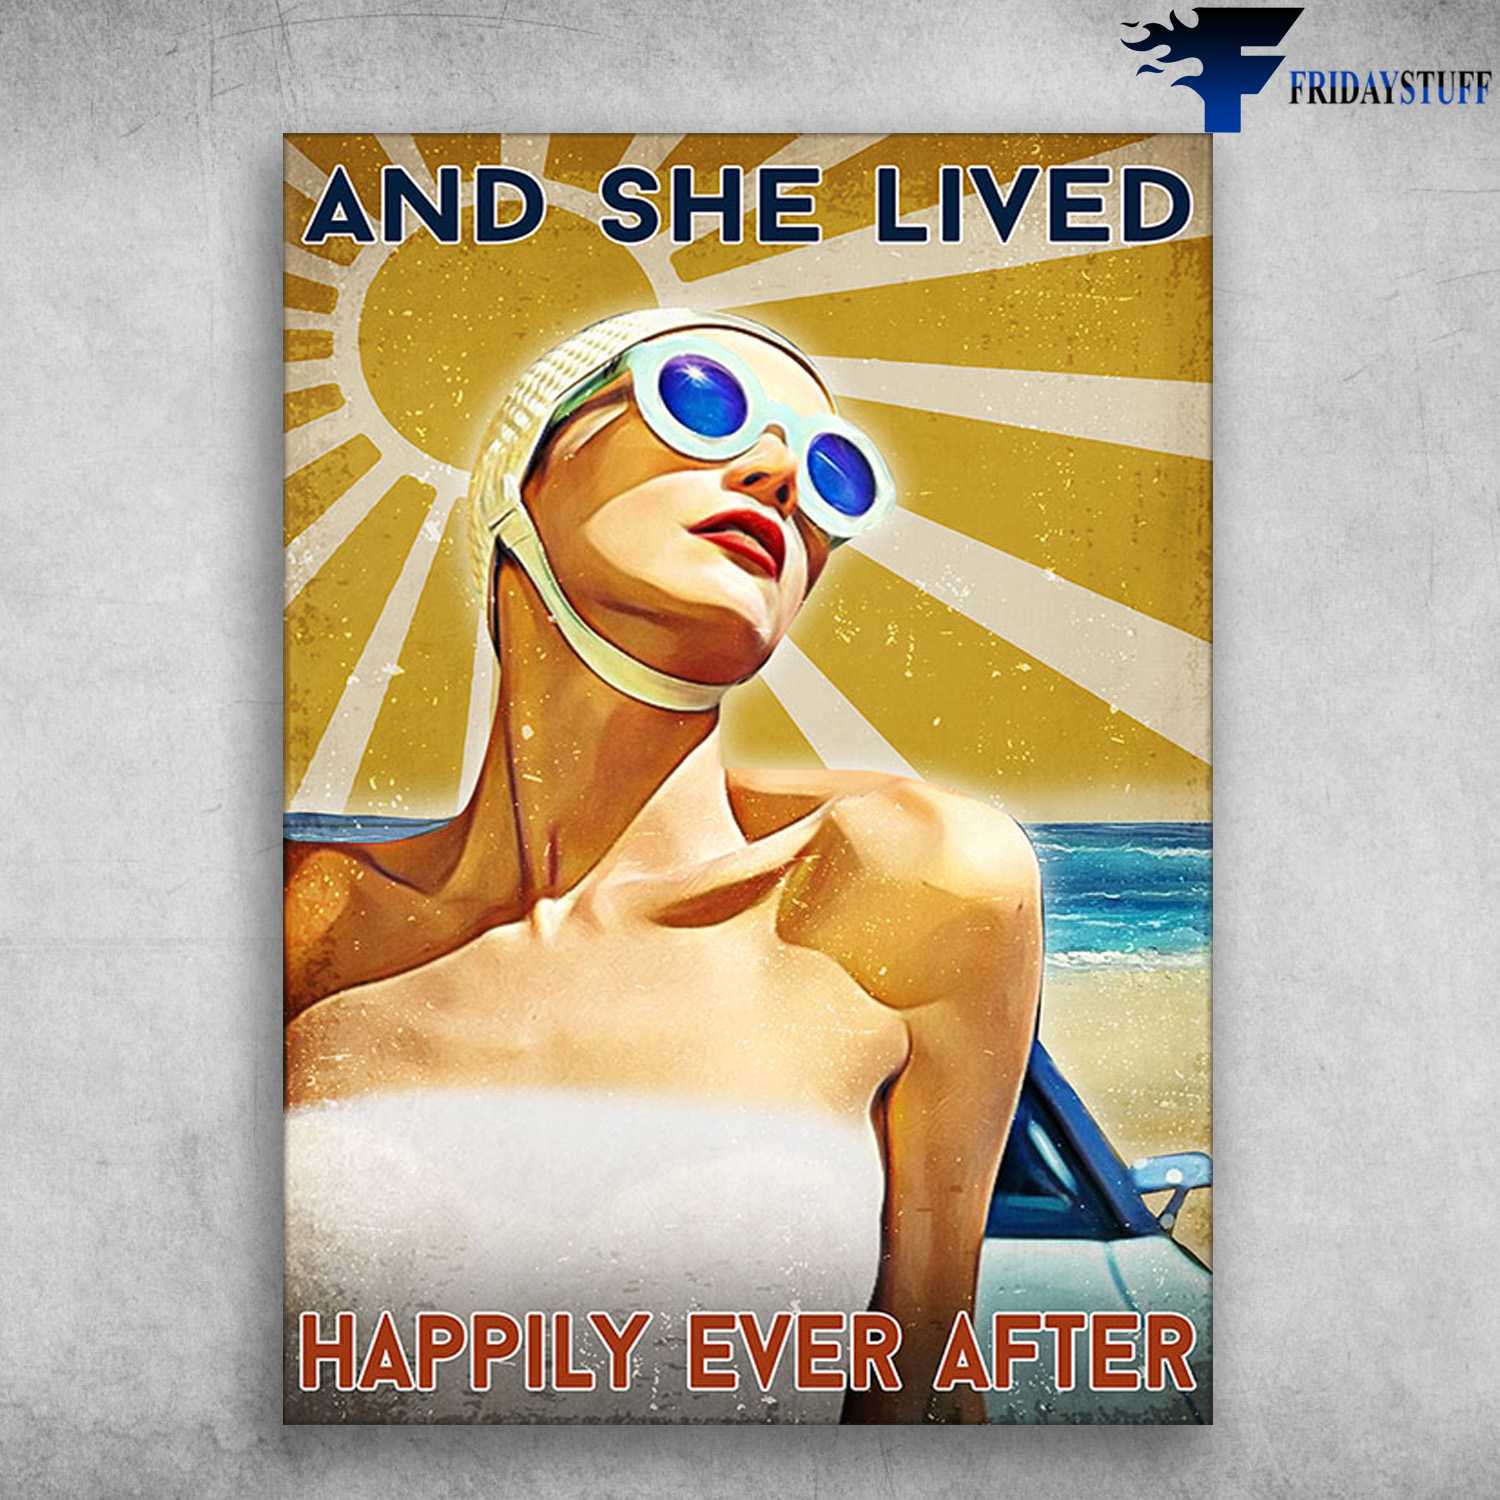 Sunbathing Girl - And She Lived, Happily Ever After, Go To The Beach